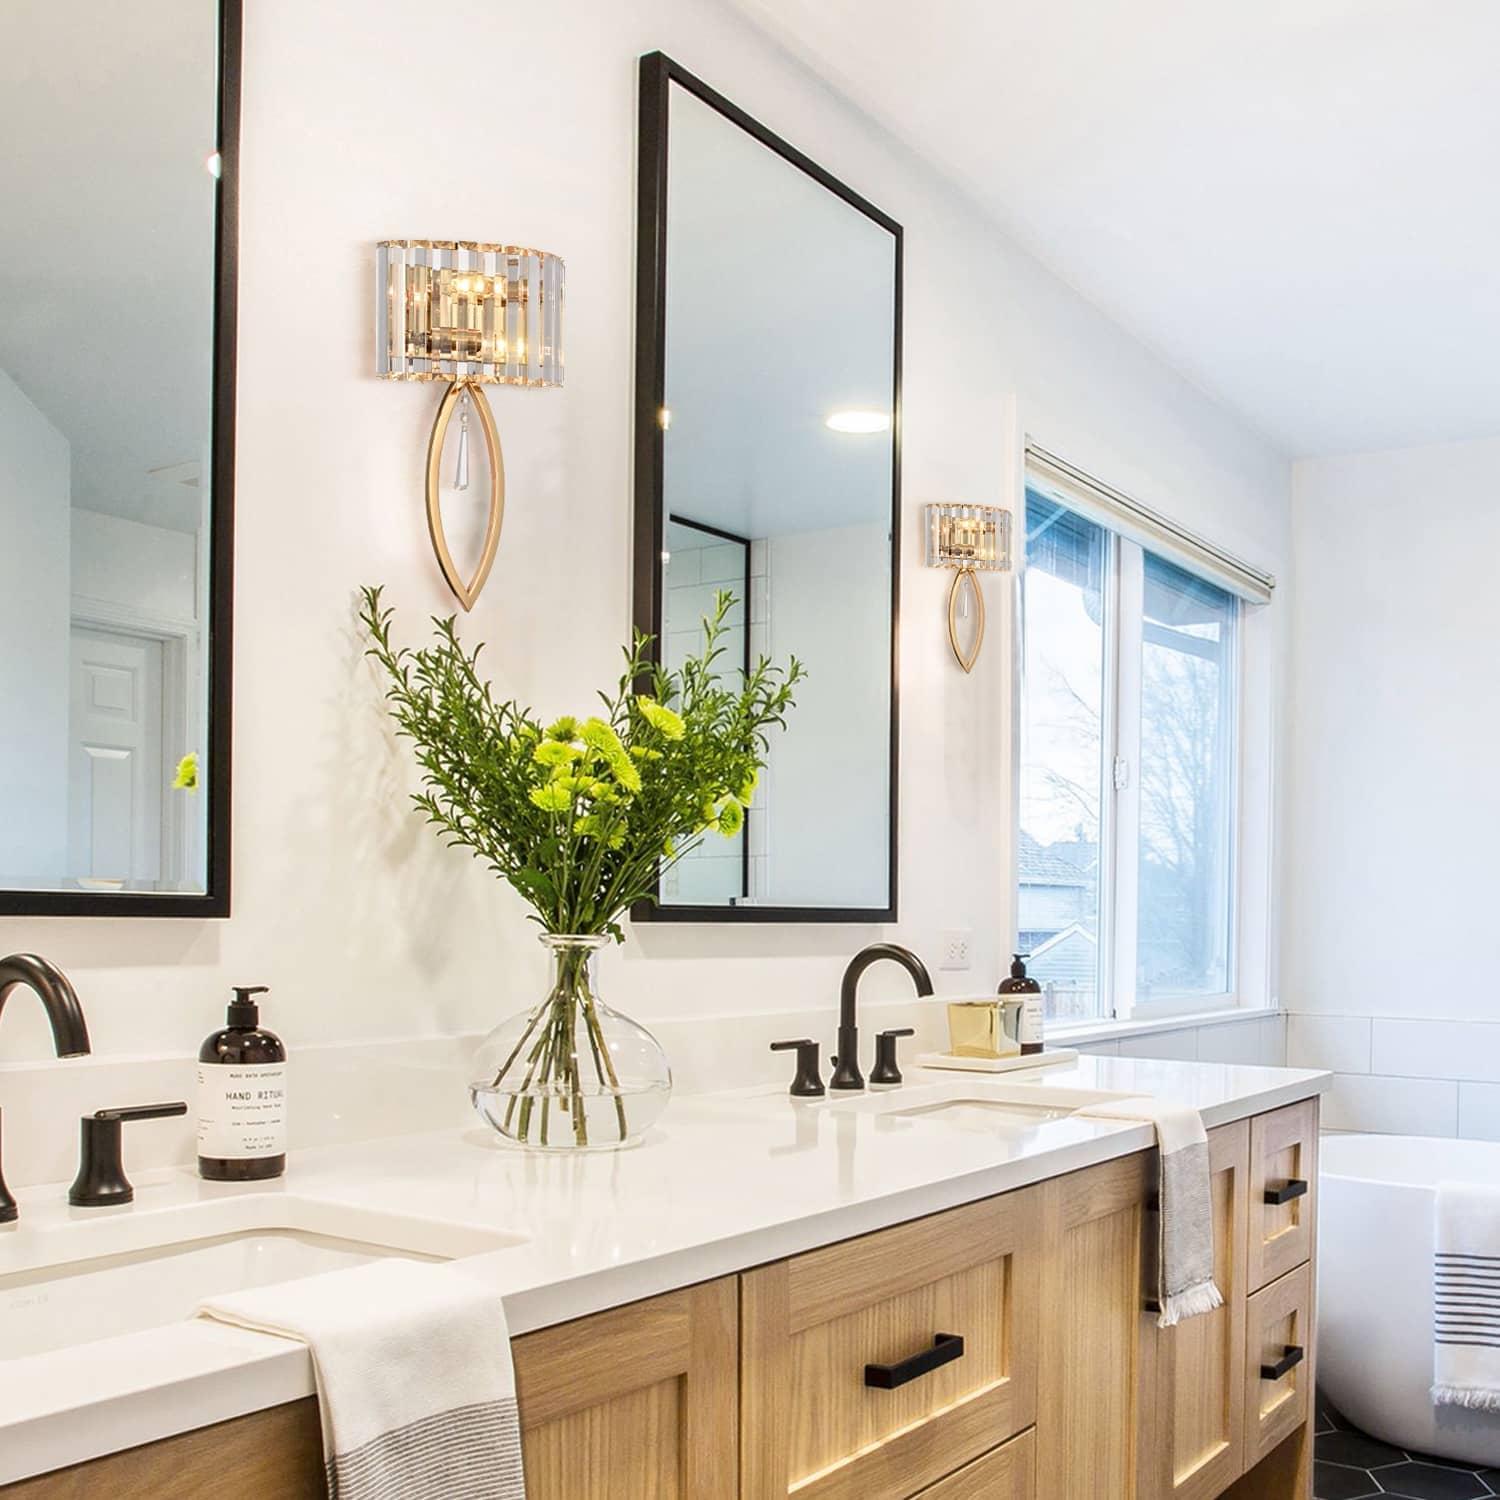 8 Bathroom Sconce Lighting Ideas That Take Your Bathroom to the Next Level